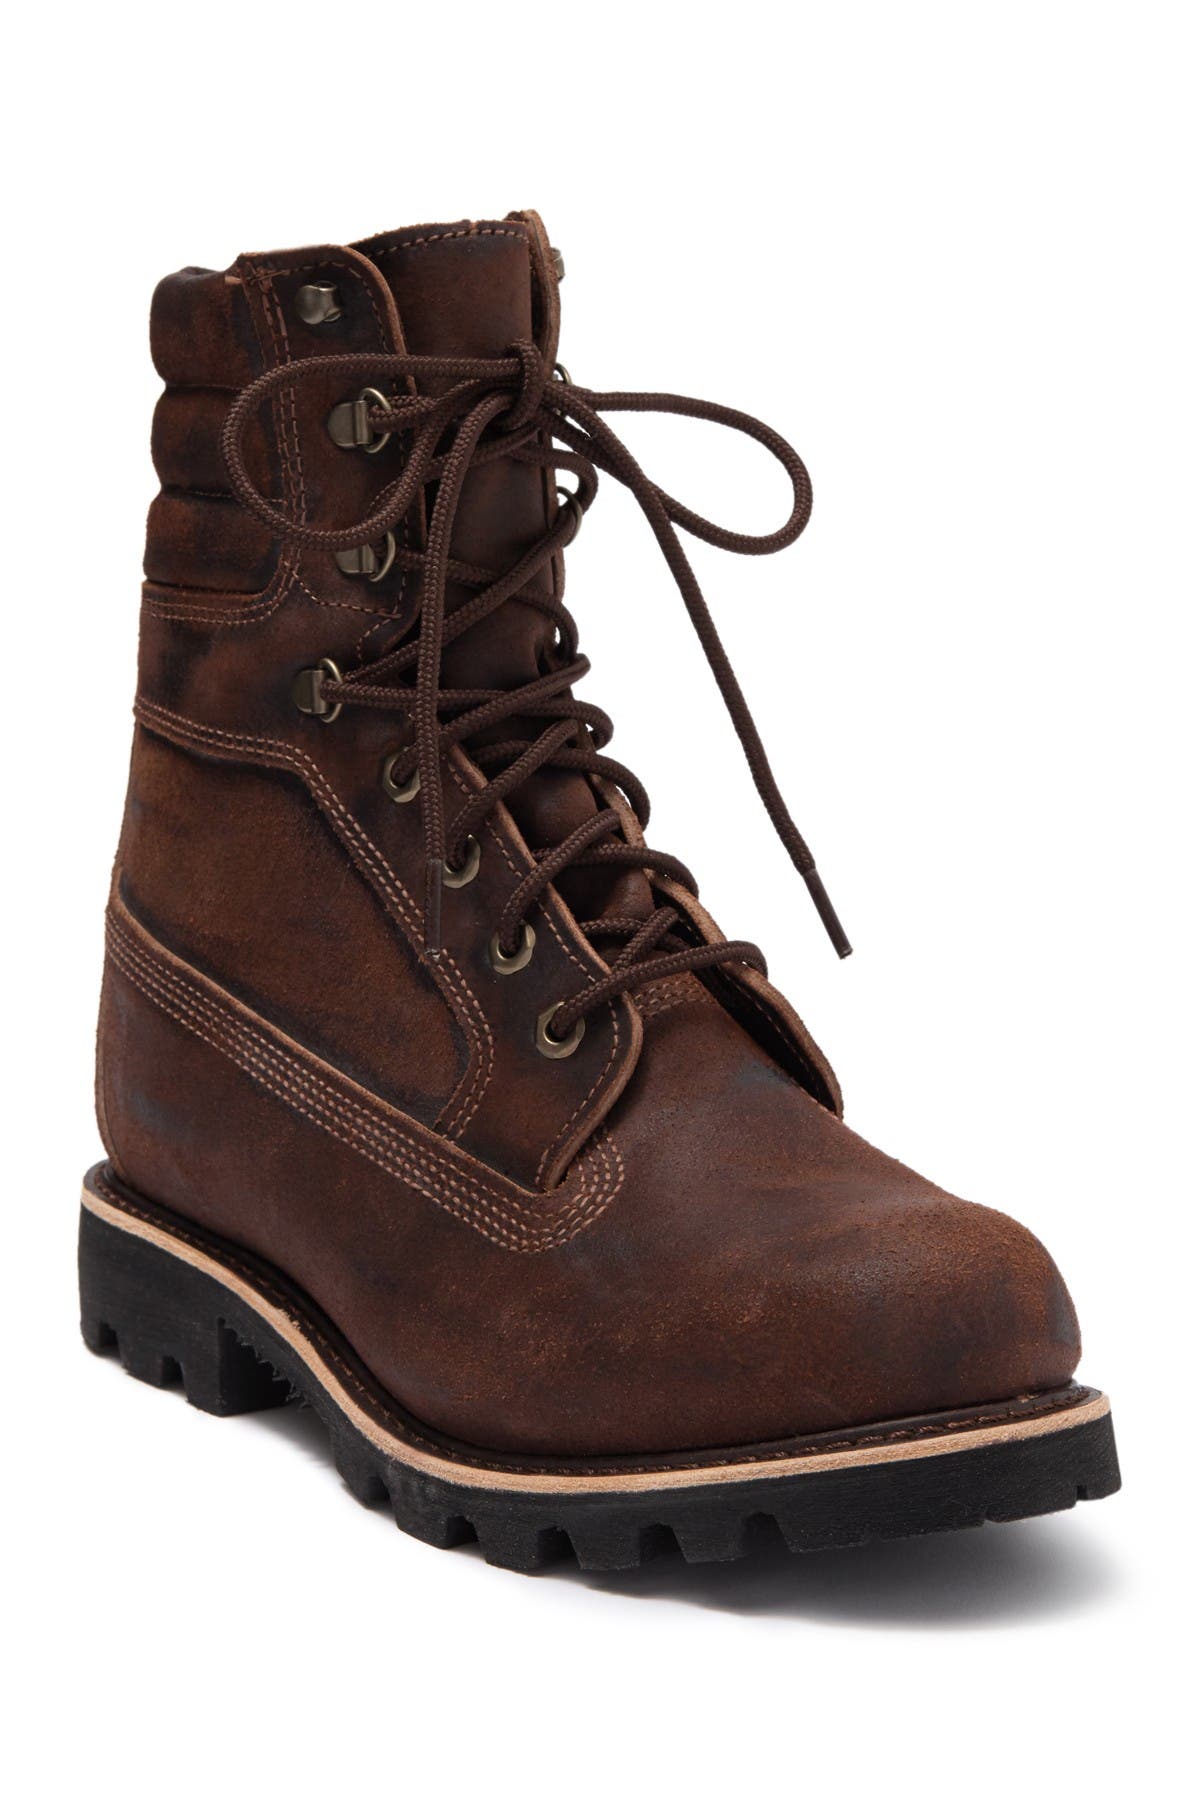 timberland american craft boots